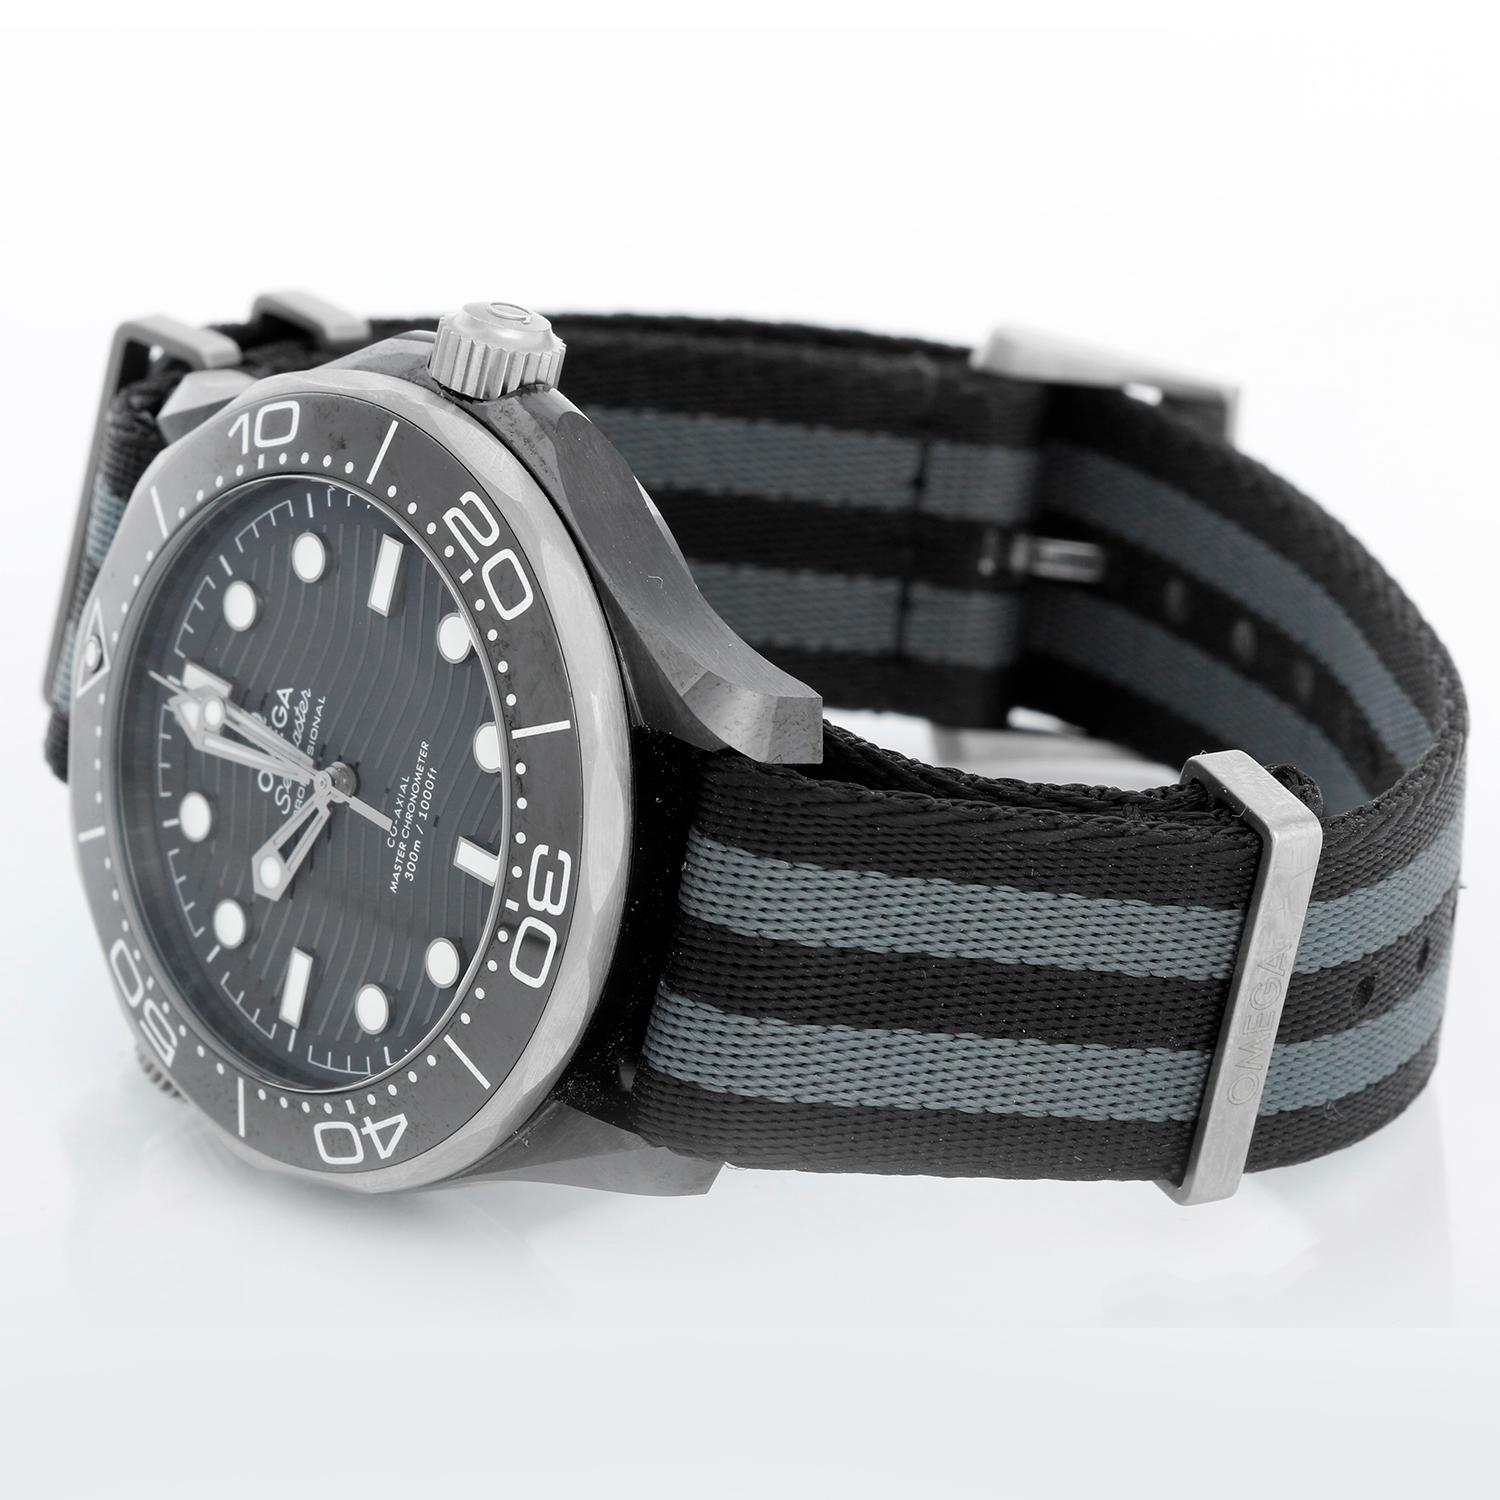 Omega Seamaster Diver 300 M Co-Axial Master Chronometer 210.92.44.20.01.002 - Automatic winding. Black Ceramic with Grade 5 Titanium Case (43mm). Black wave dial with luminous markers. Black & Grey 5-stripe Nato Strap with Omega titanium buckle.